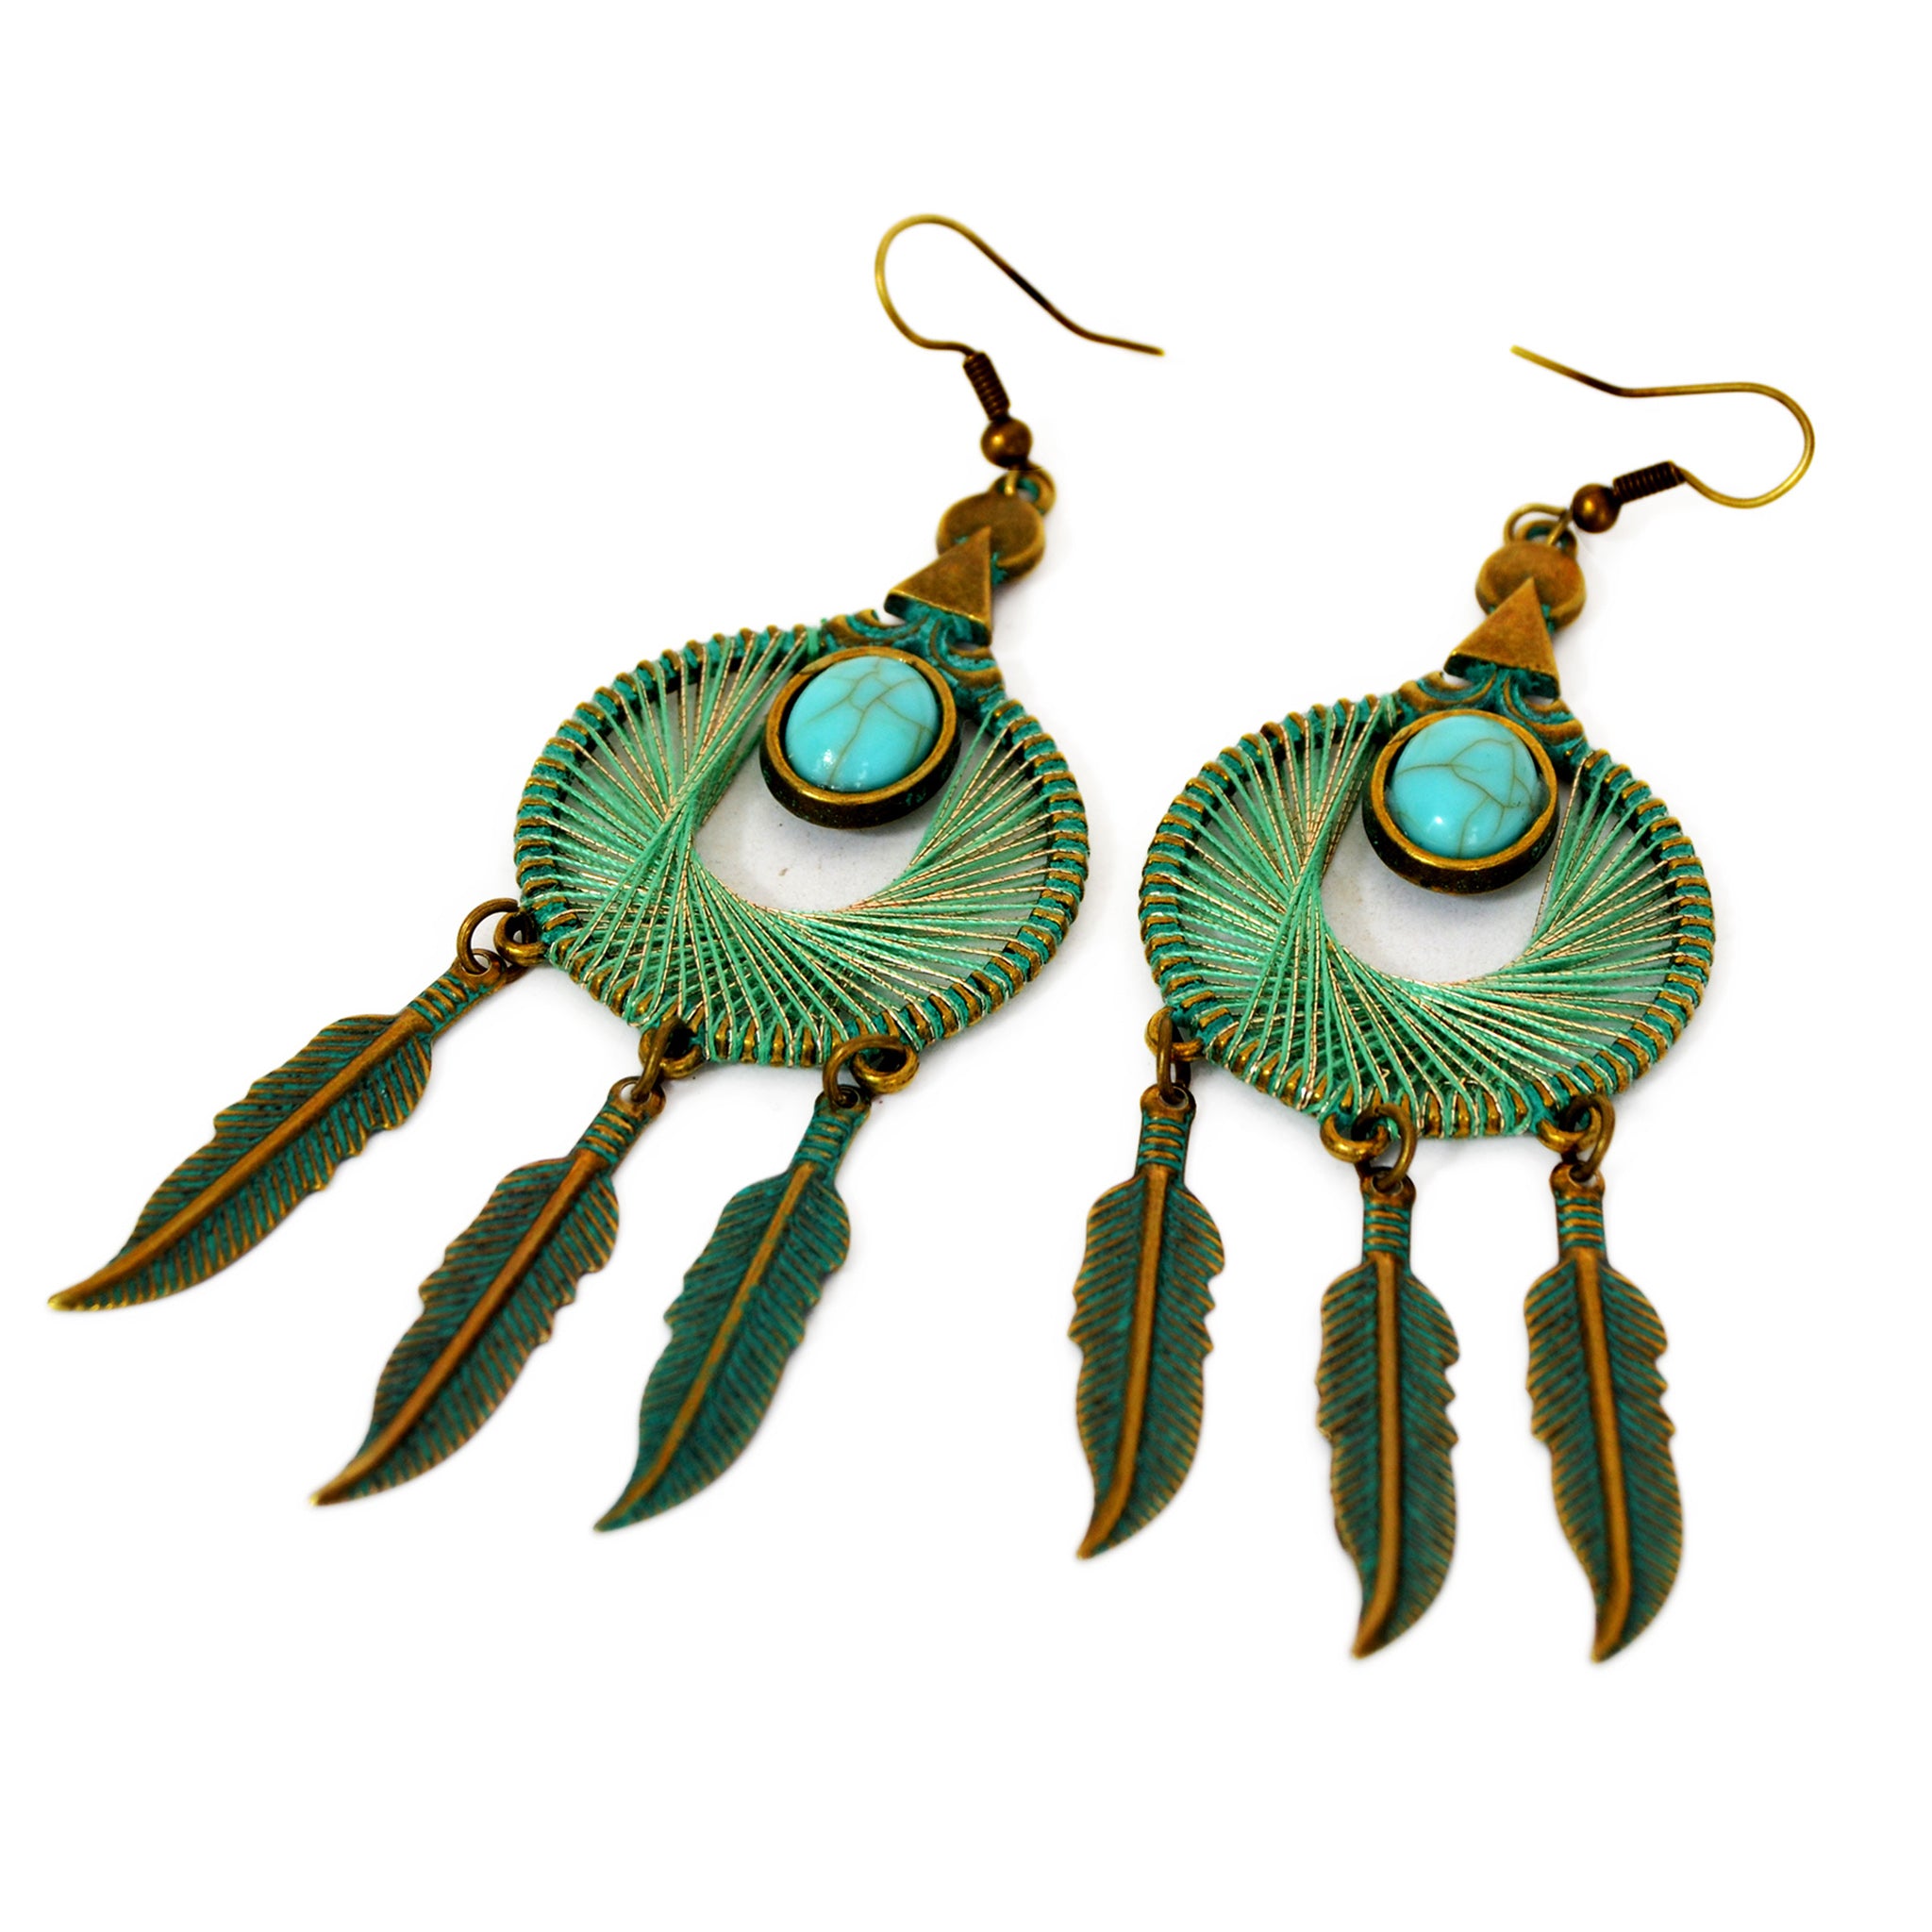 Hoop old patina earrings with blue and gold wrapped strings, turquoise bead and hanging feathers